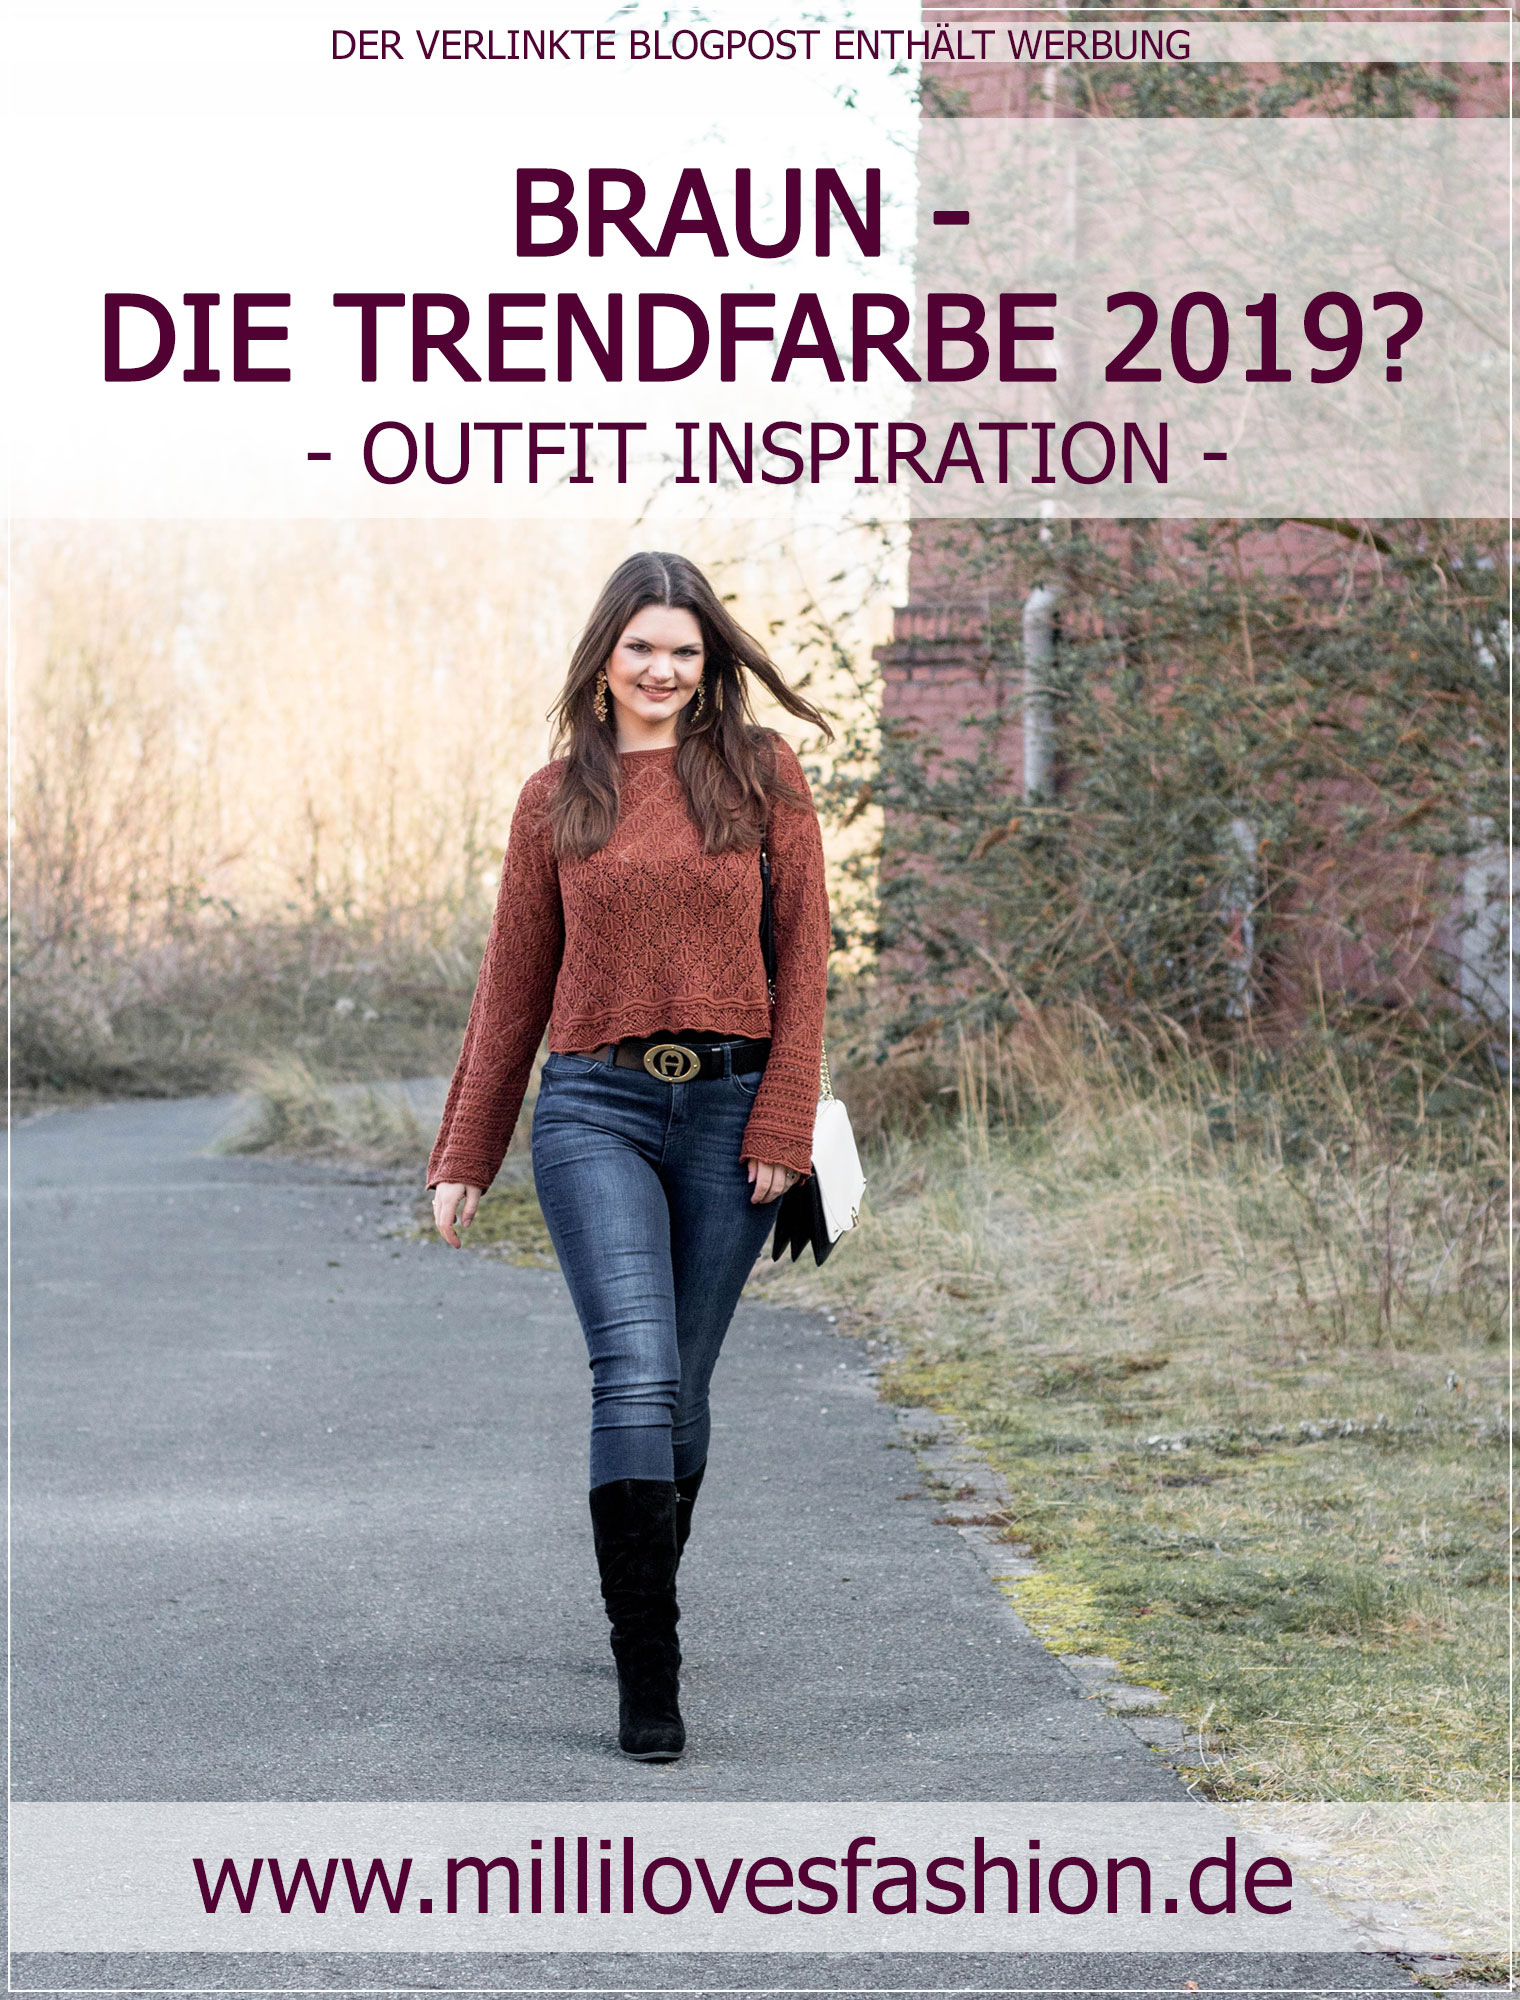 Braun, Trendfarbe, Modetrend, Sommerlook, Frühlingsoutfit, Boho-Style, Sommeroutfit, Styleguide, Outfitinspiration, Winterstyle, Alltagslook, Modebloggerin, Fashionbloggerin, Modeblog, Ruhrgebiet